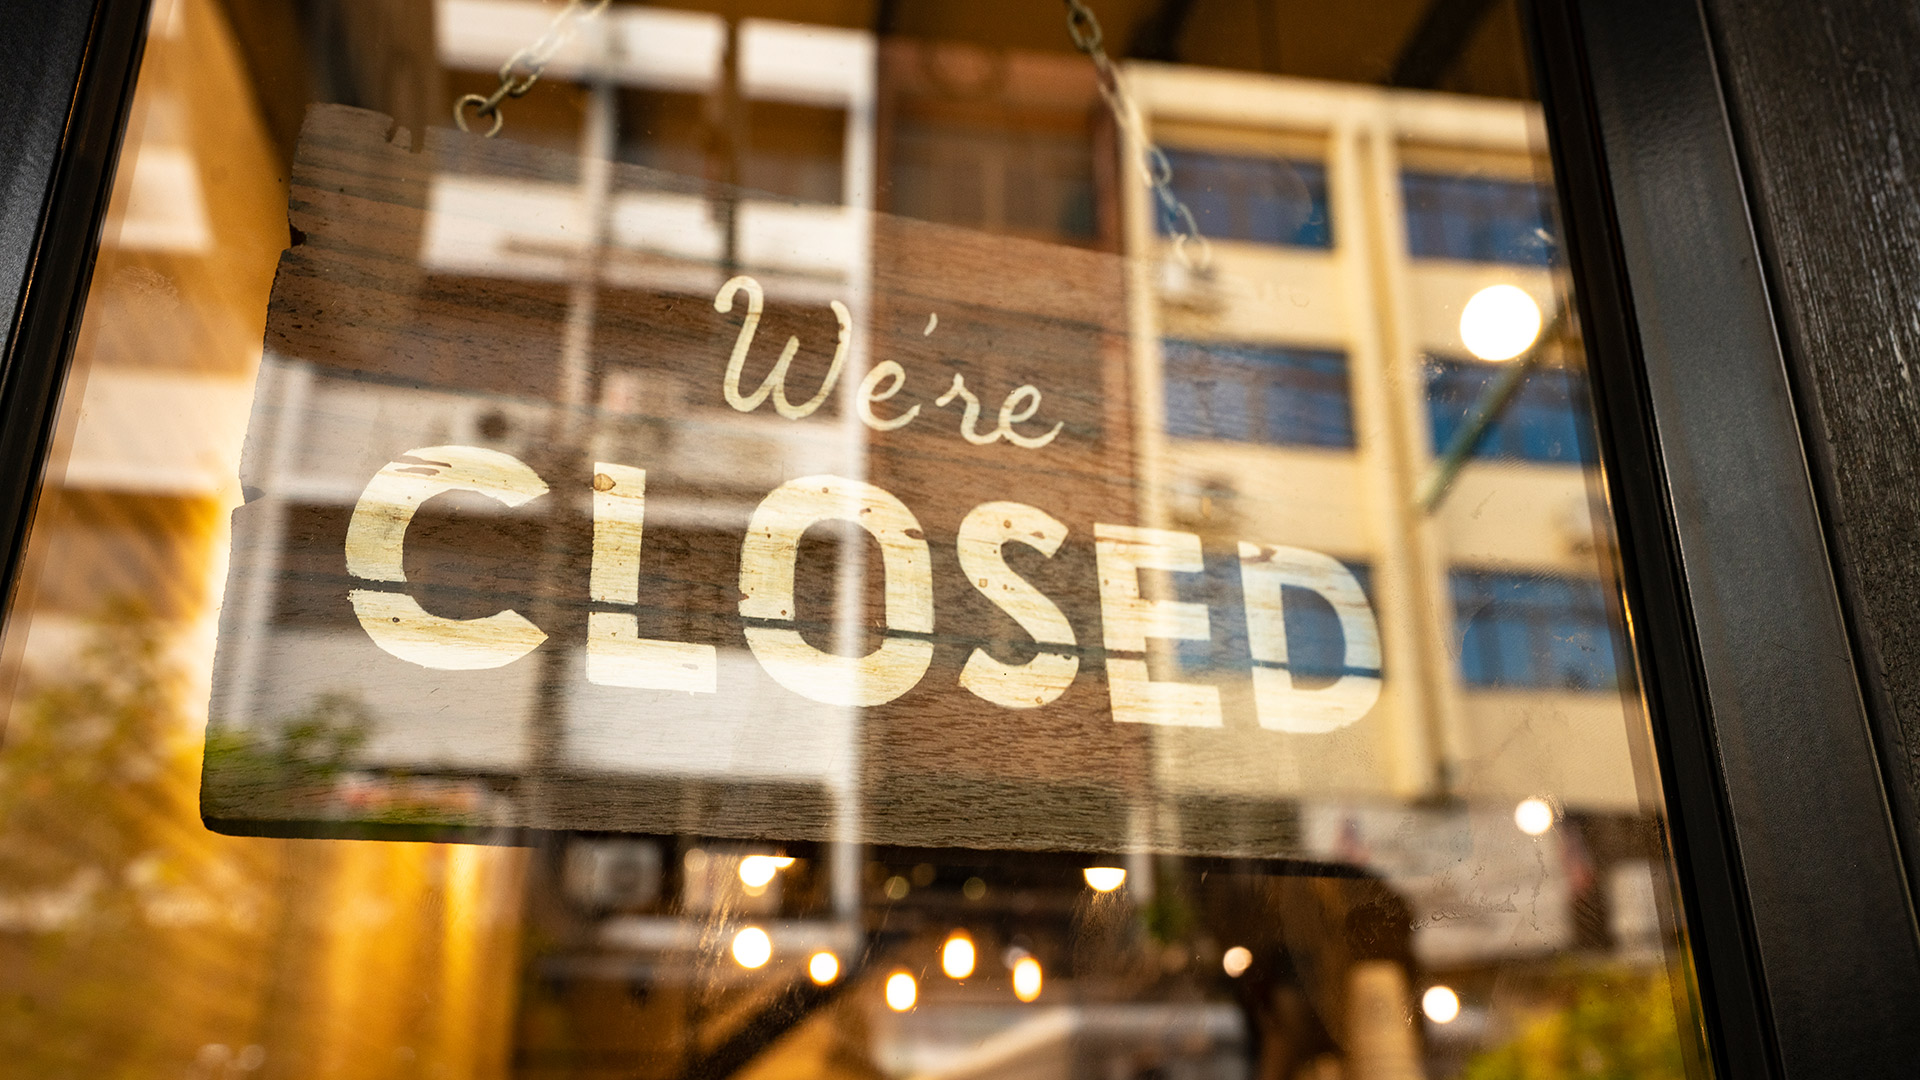 Closed sign hanging in business window.